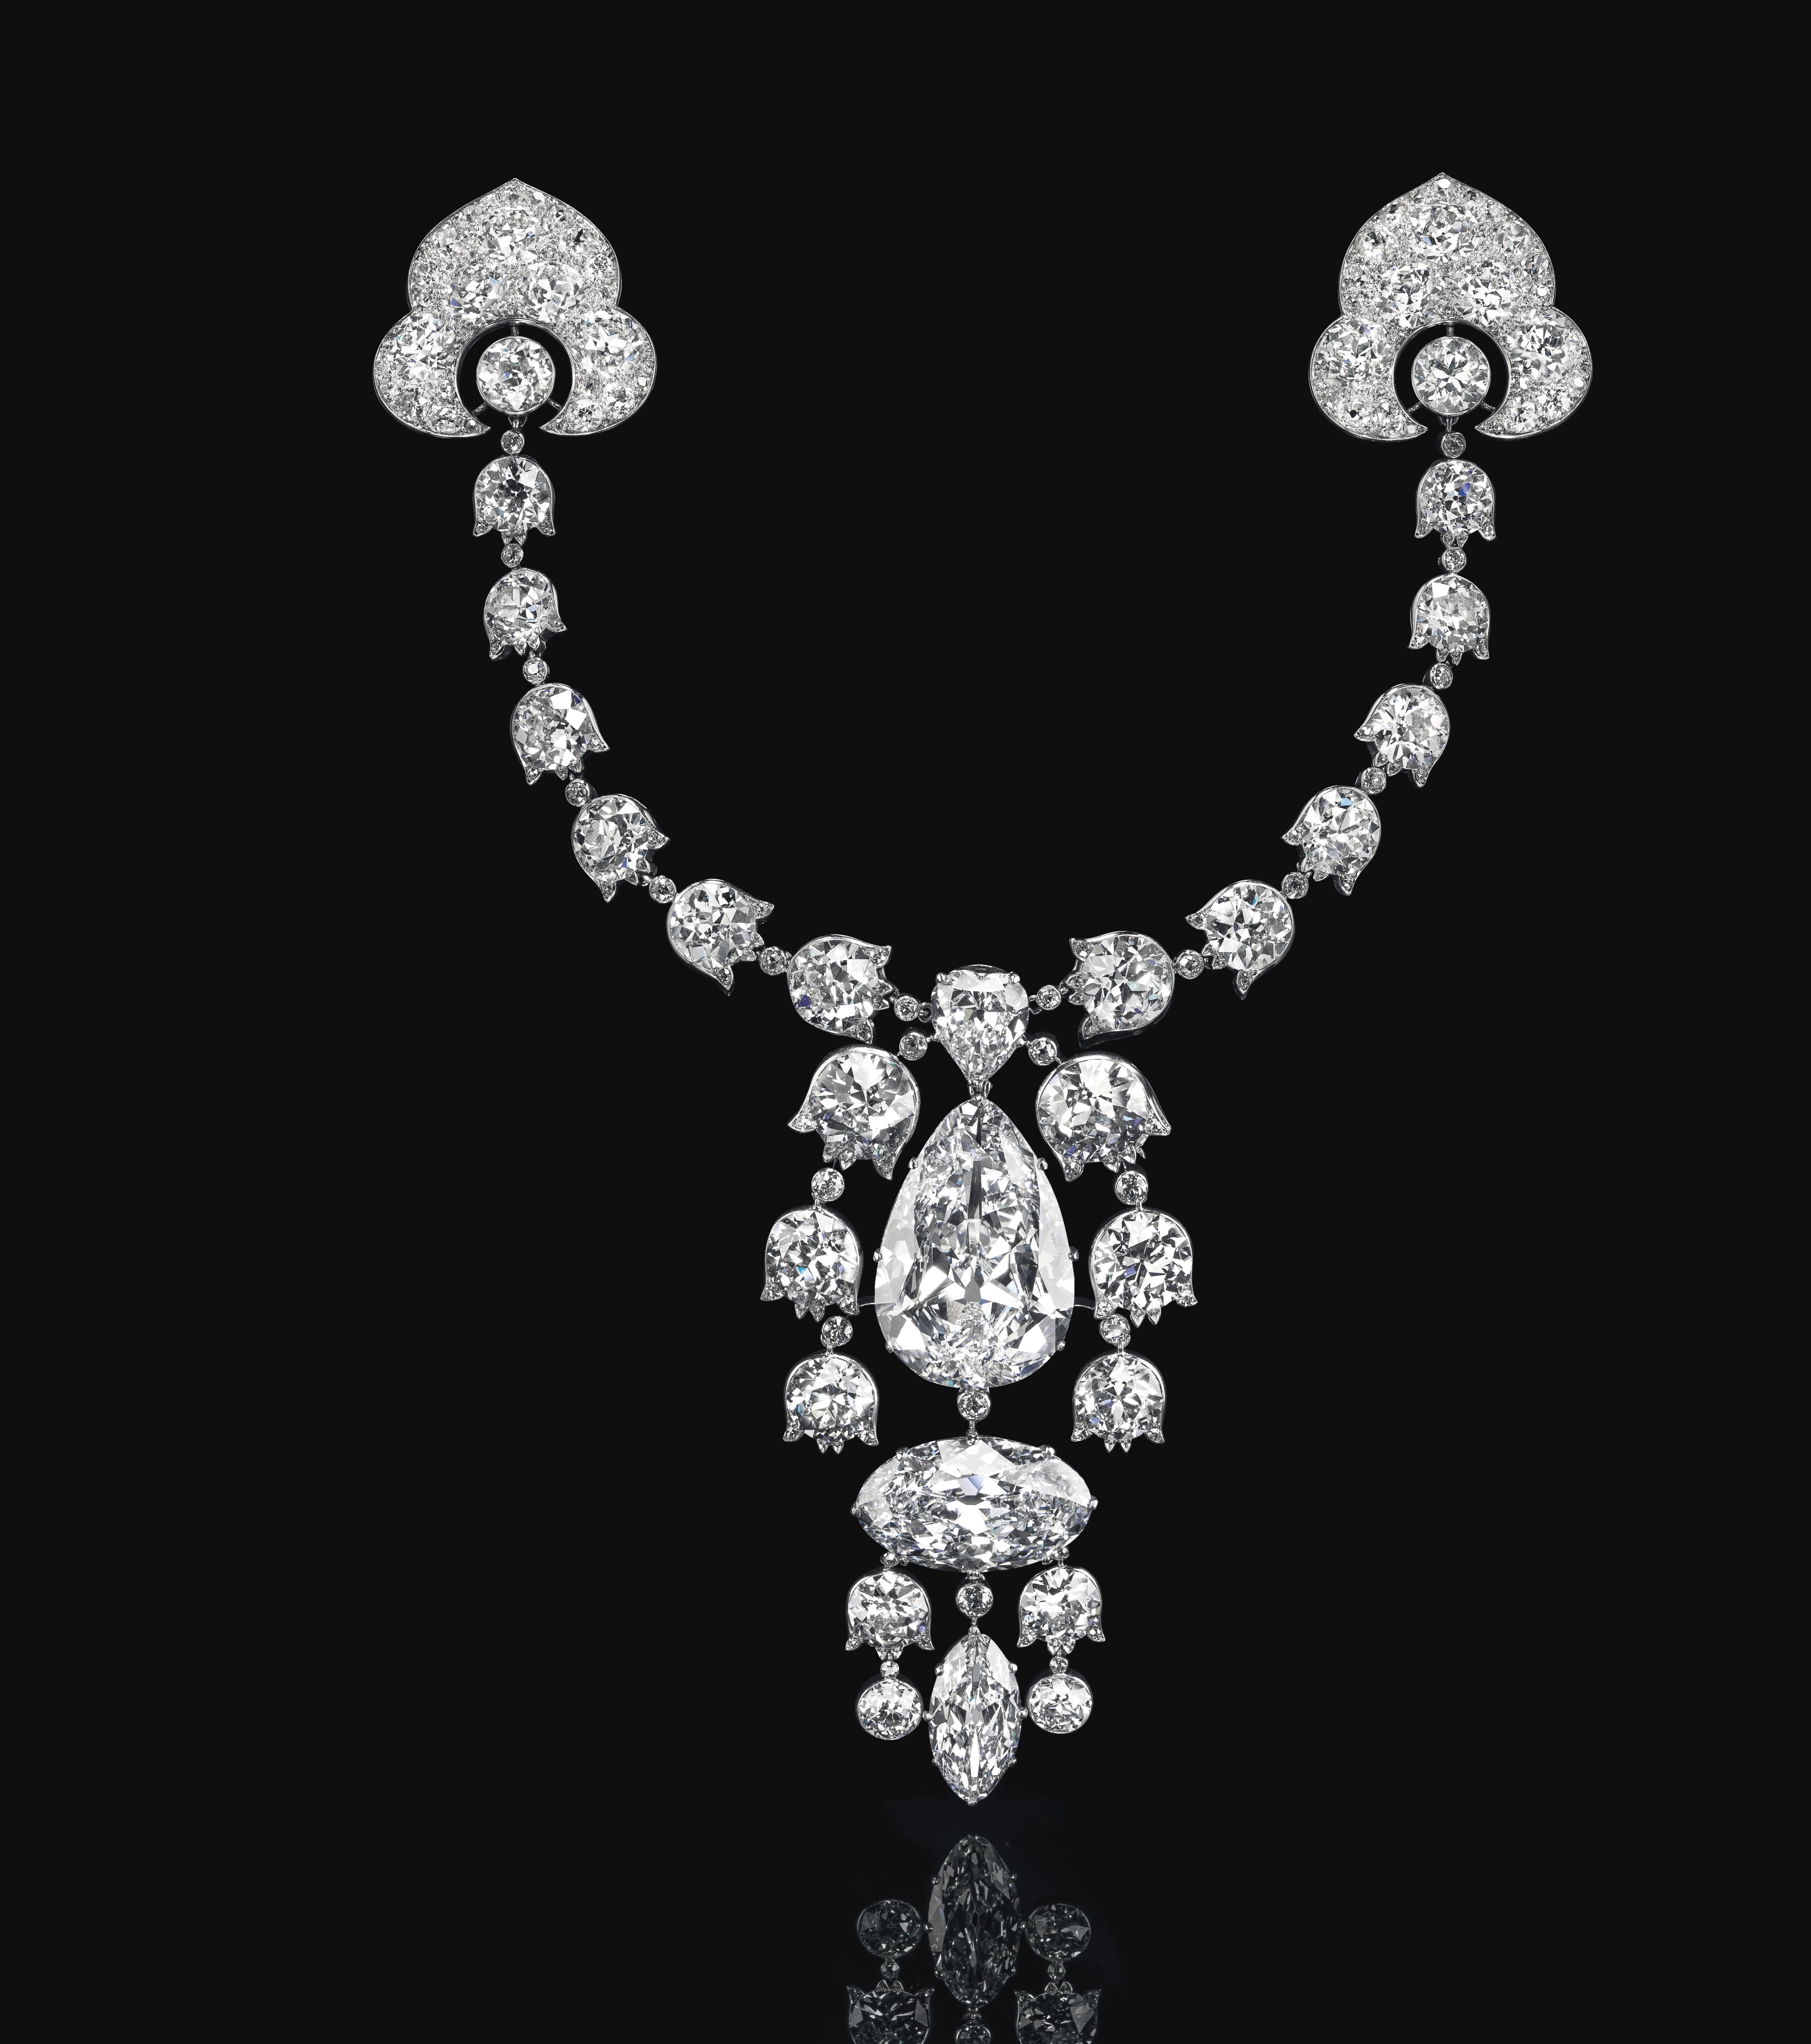 The ‘devant-de-corsage’ brooch was made to order by Cartier in 1912 for Solomon Barnato Joel, who made his fortune in the South African diamond mines. As a director of Barnato Brothers as well as of De Beers Consolidated Diamonds Mines, Joel was a major influence on the diamond and gold industries at the beginning of the 20th century. His fascination with diamonds remained constant throughout his long career, and for this brooch Joel provided Cartier with his four finest stones.

The brooch sold for $10,603,500 to a private collector in the room, creating a new world record.